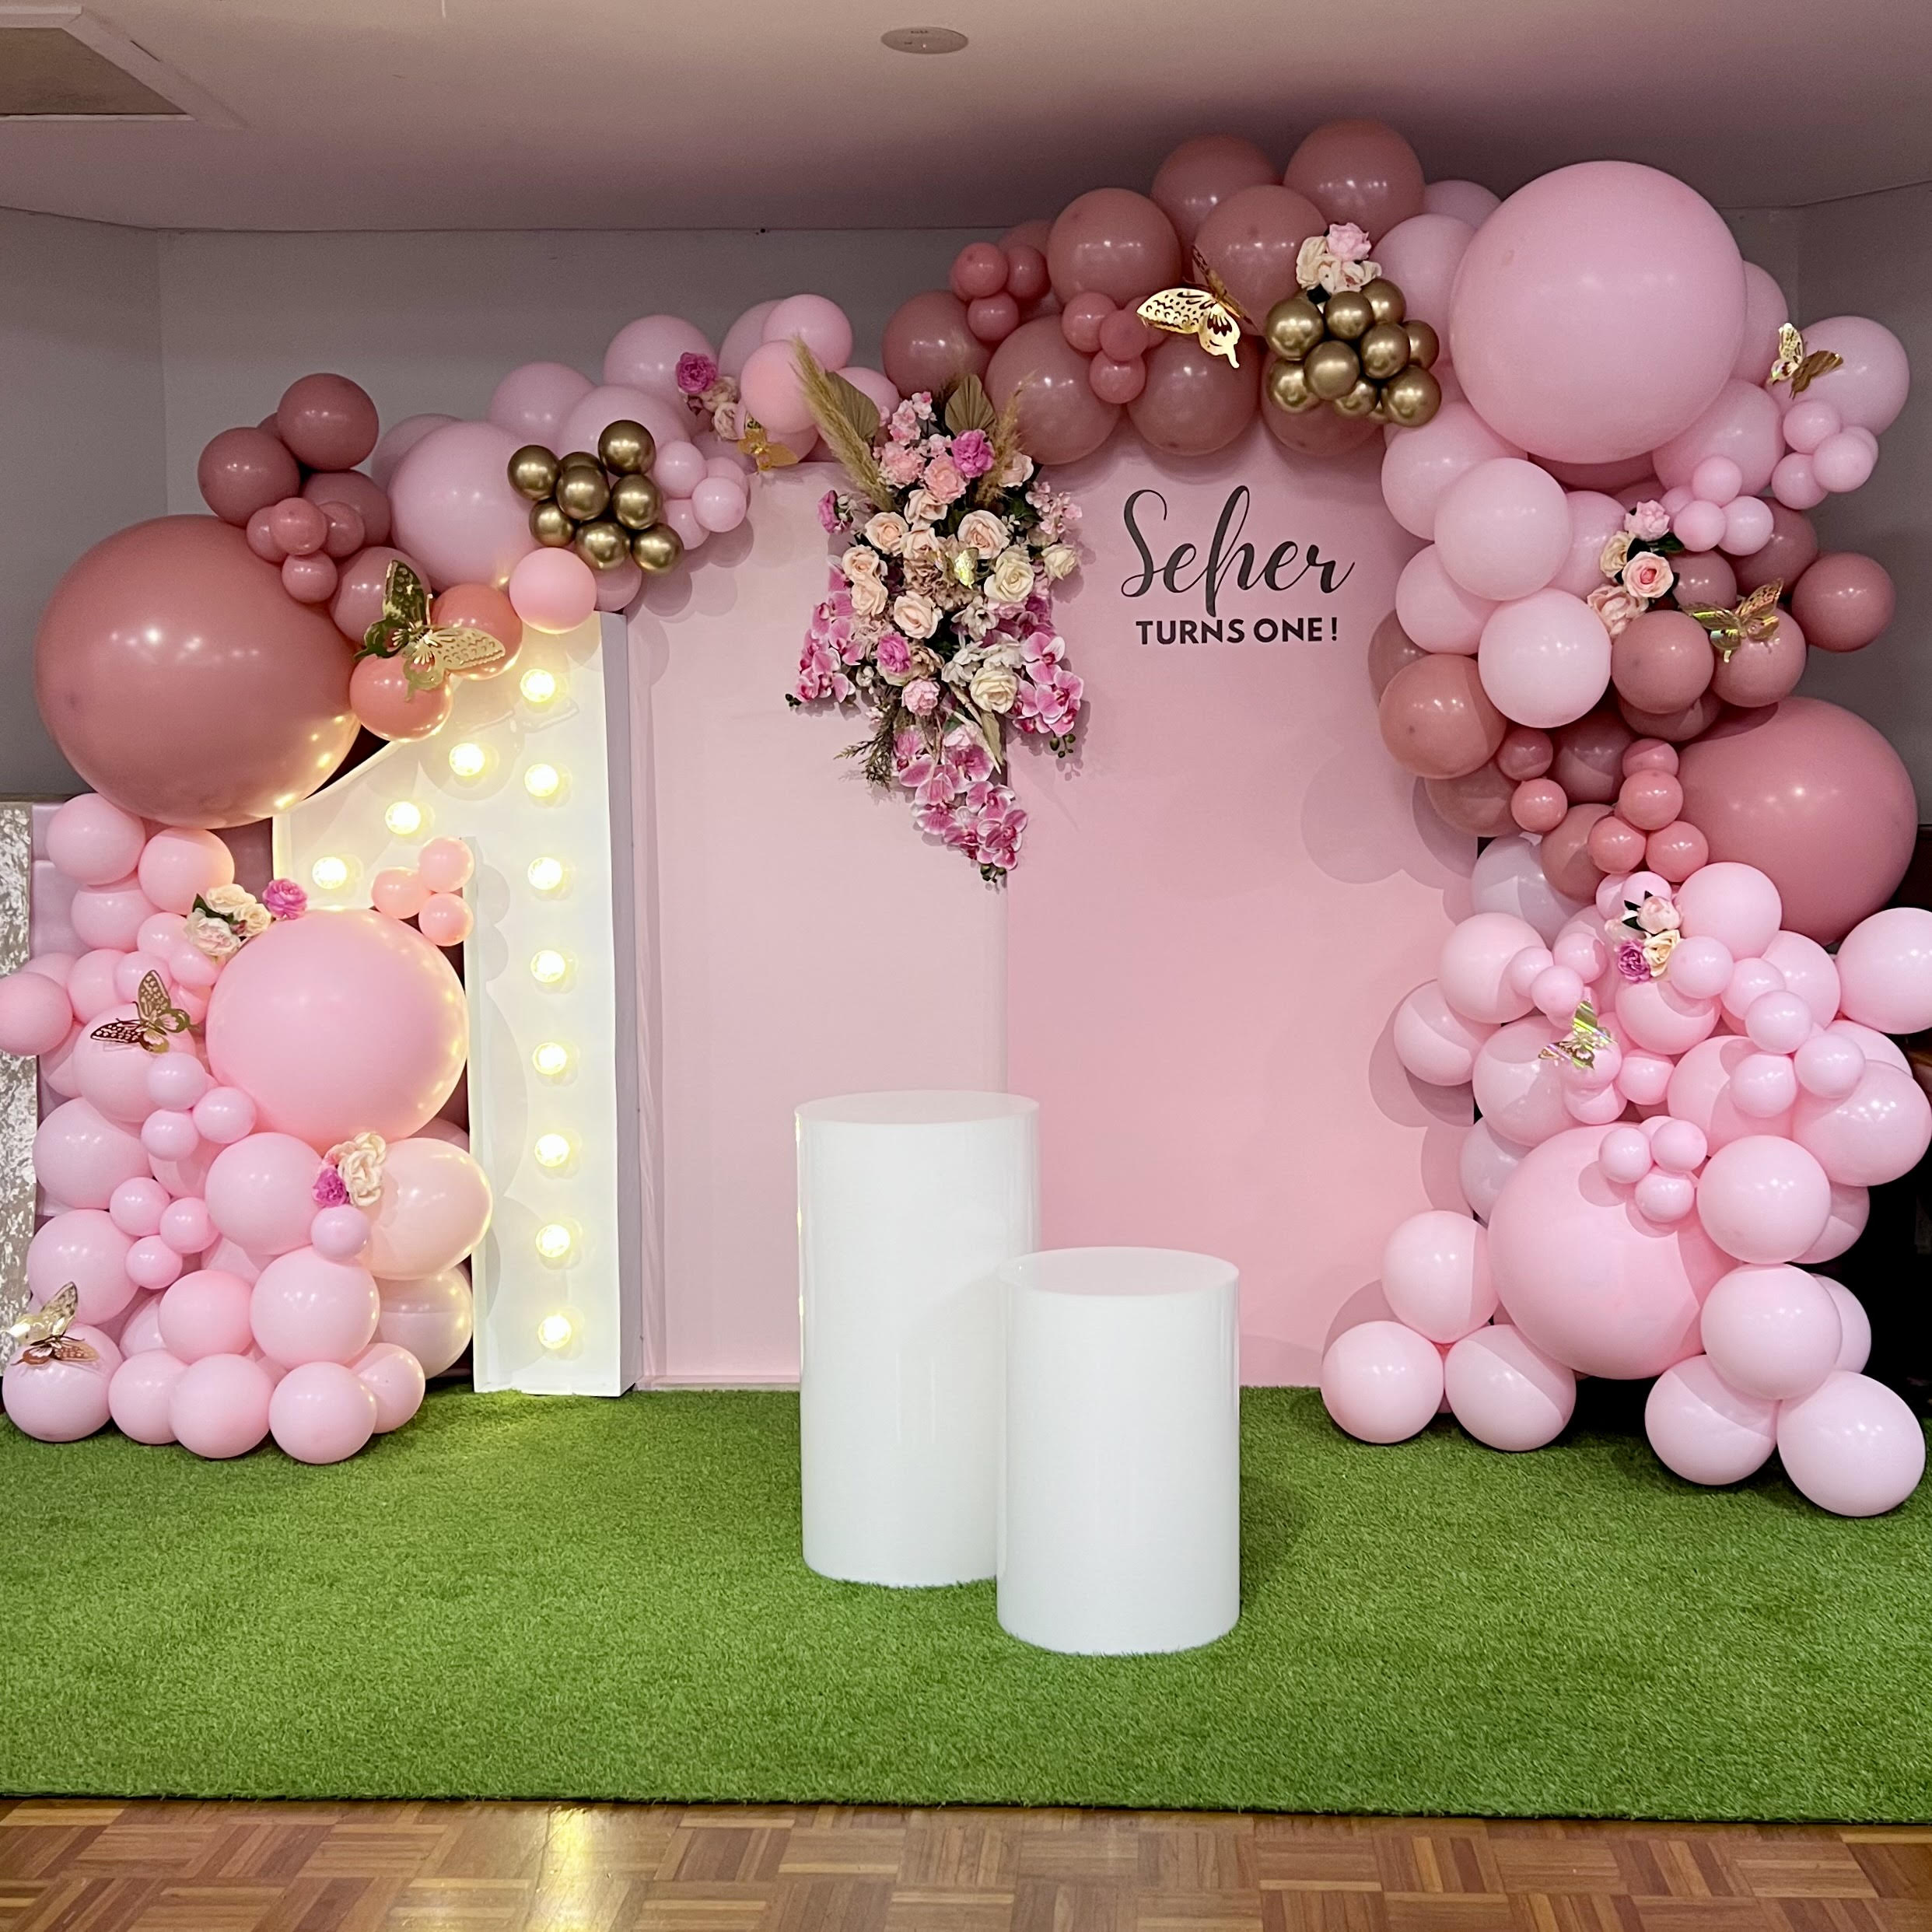 Best Kids Birthday Party - Decoration Ideas for Kids Birthday Party